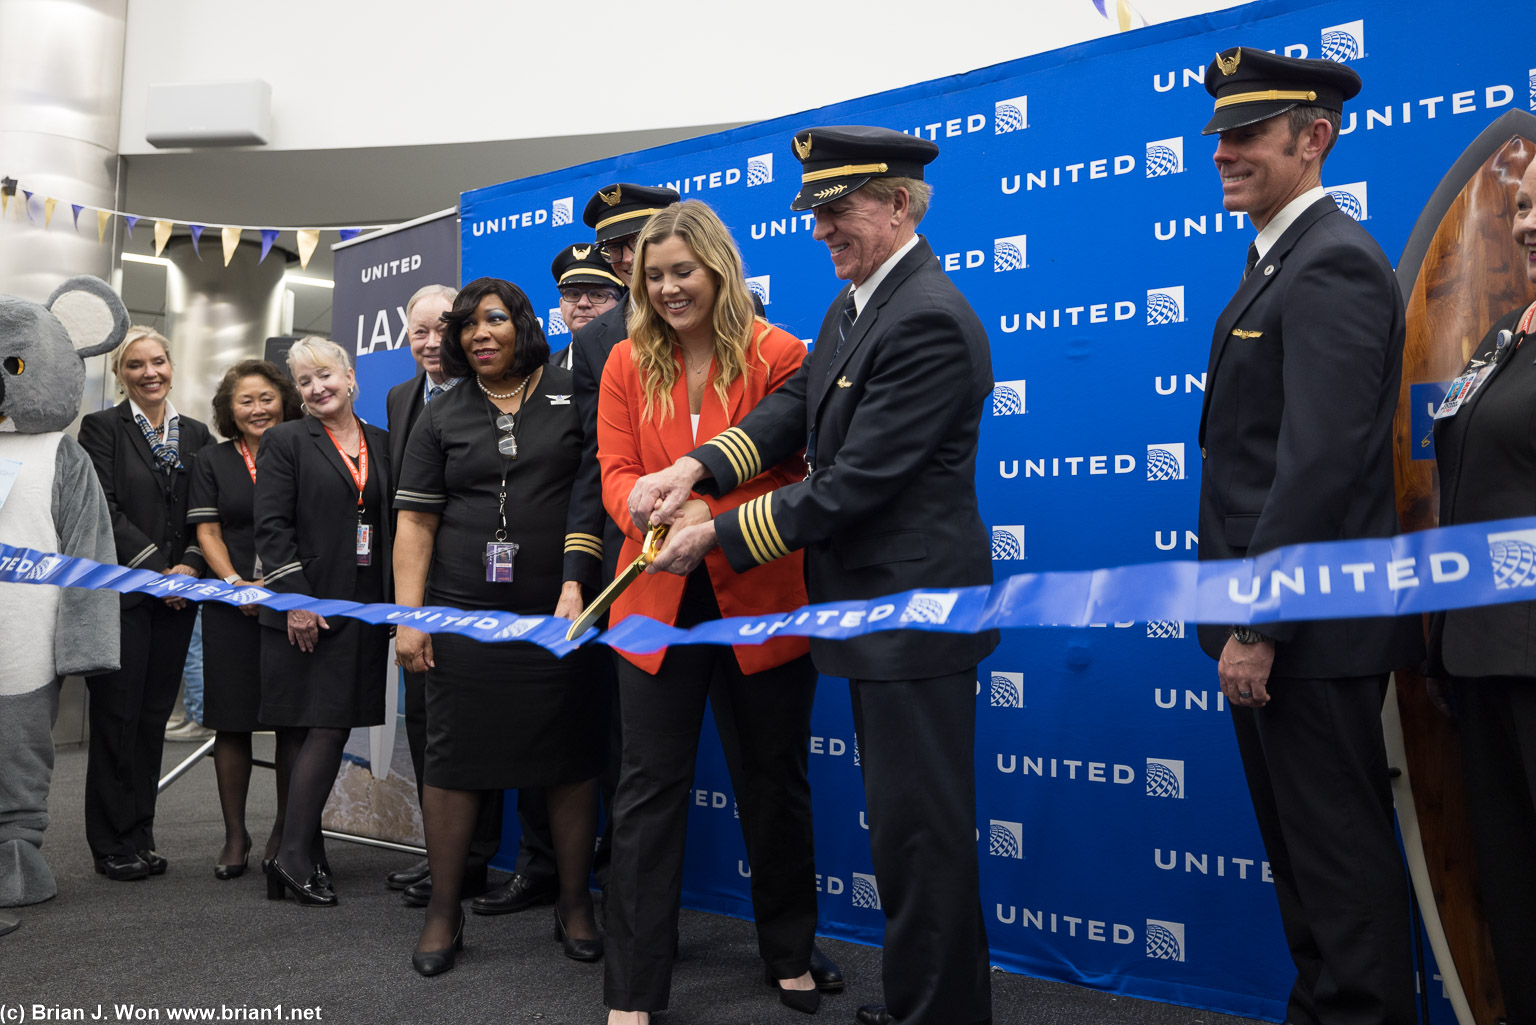 RIbbon cutting with Maggie Ronan, Director of Global Market Strategy. United Airlines.